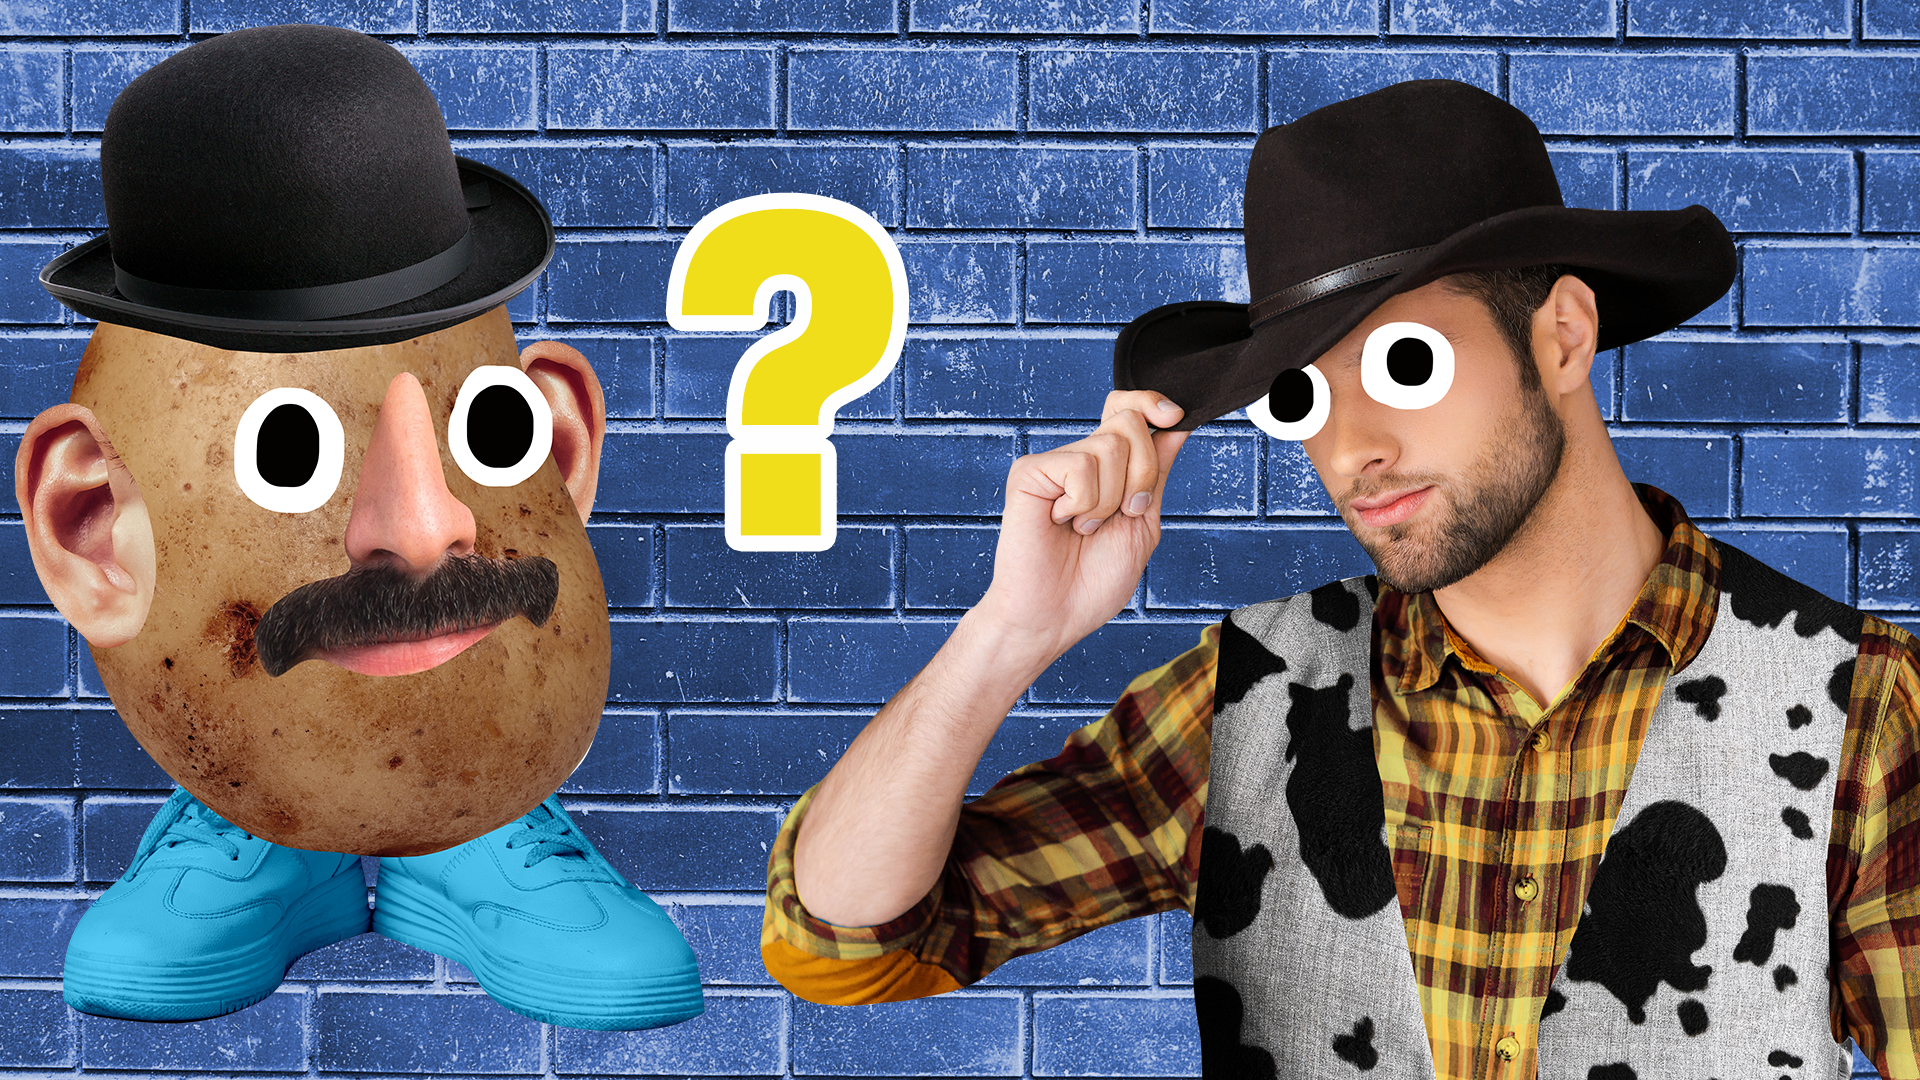 Beano Woody and Mr. Potato head with question mark on blue brick background